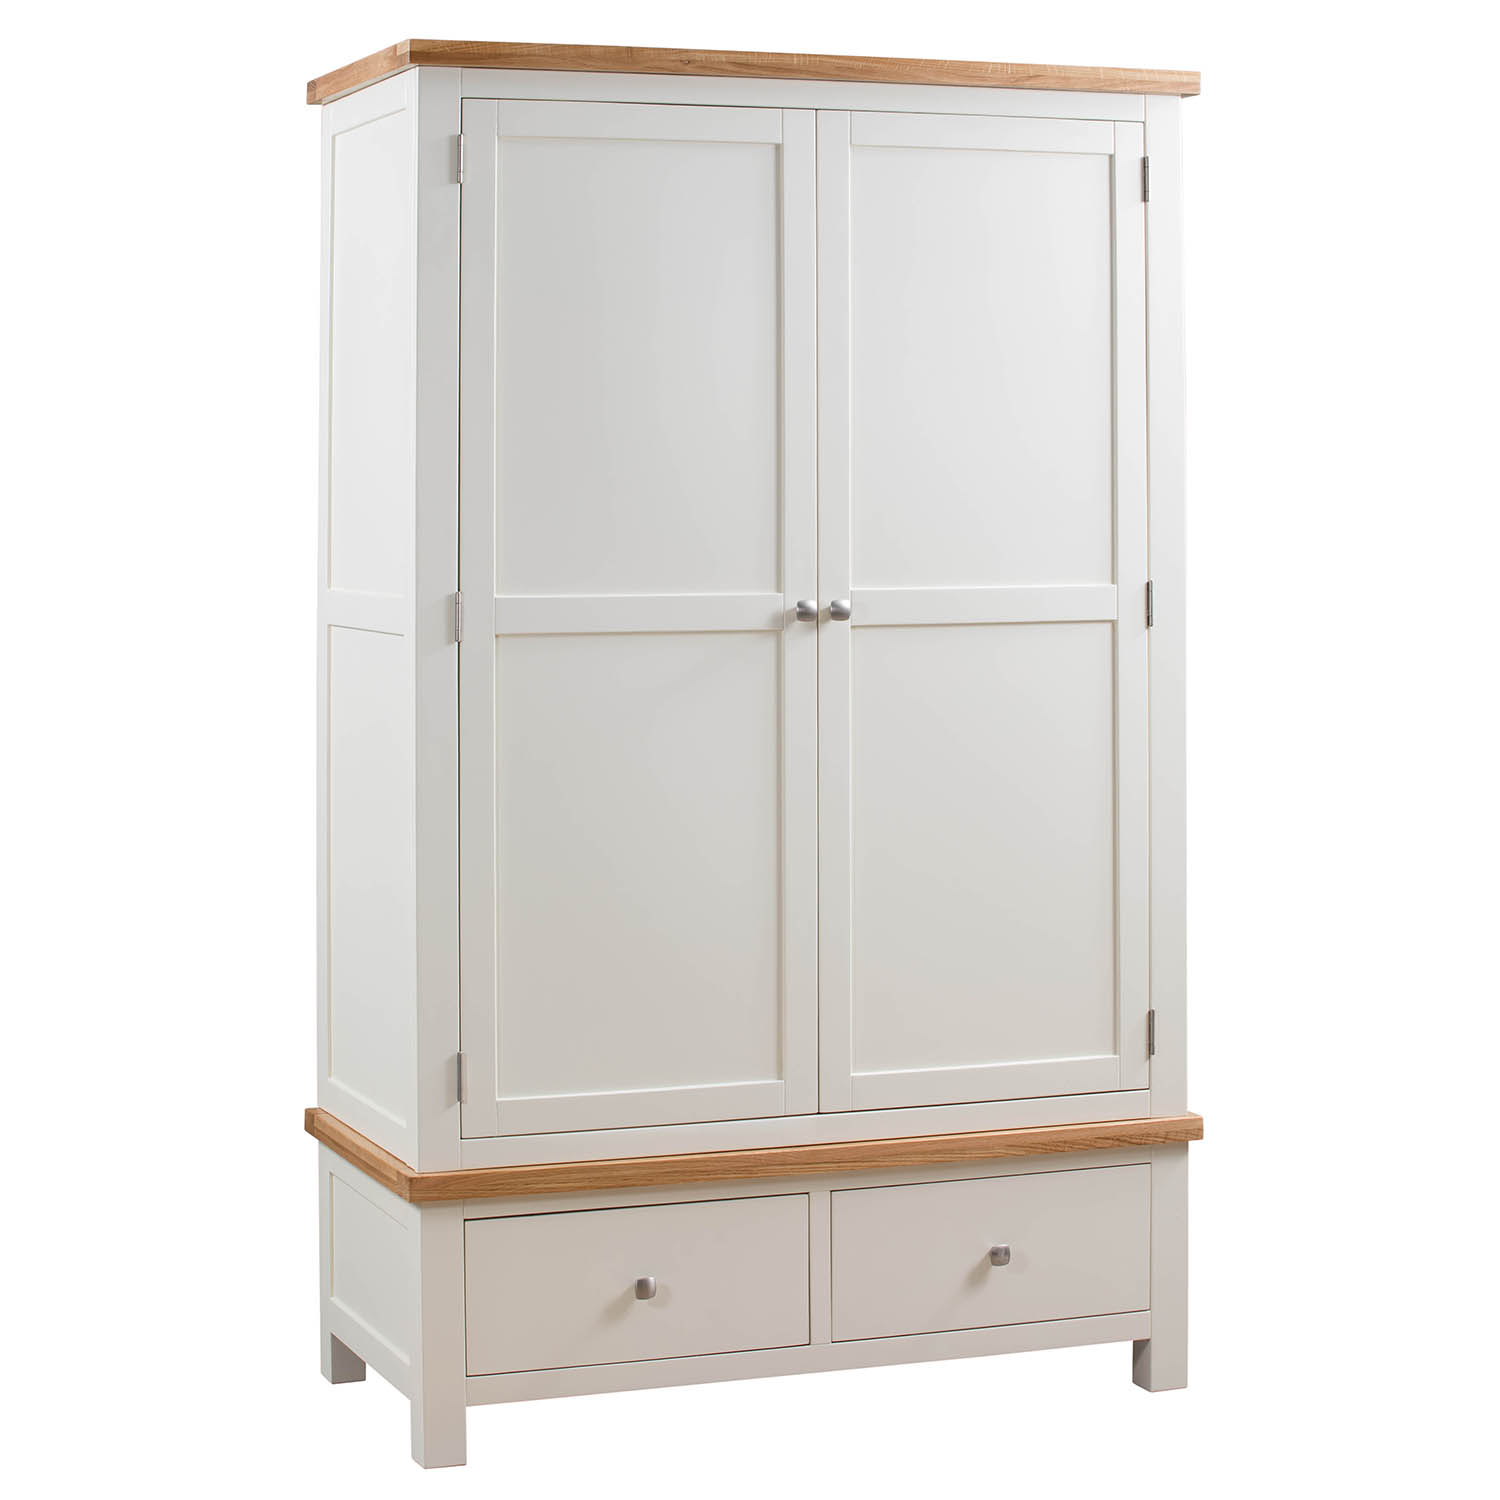 Maiden Oak Painted Gents Wardrobe with 2 Drawers